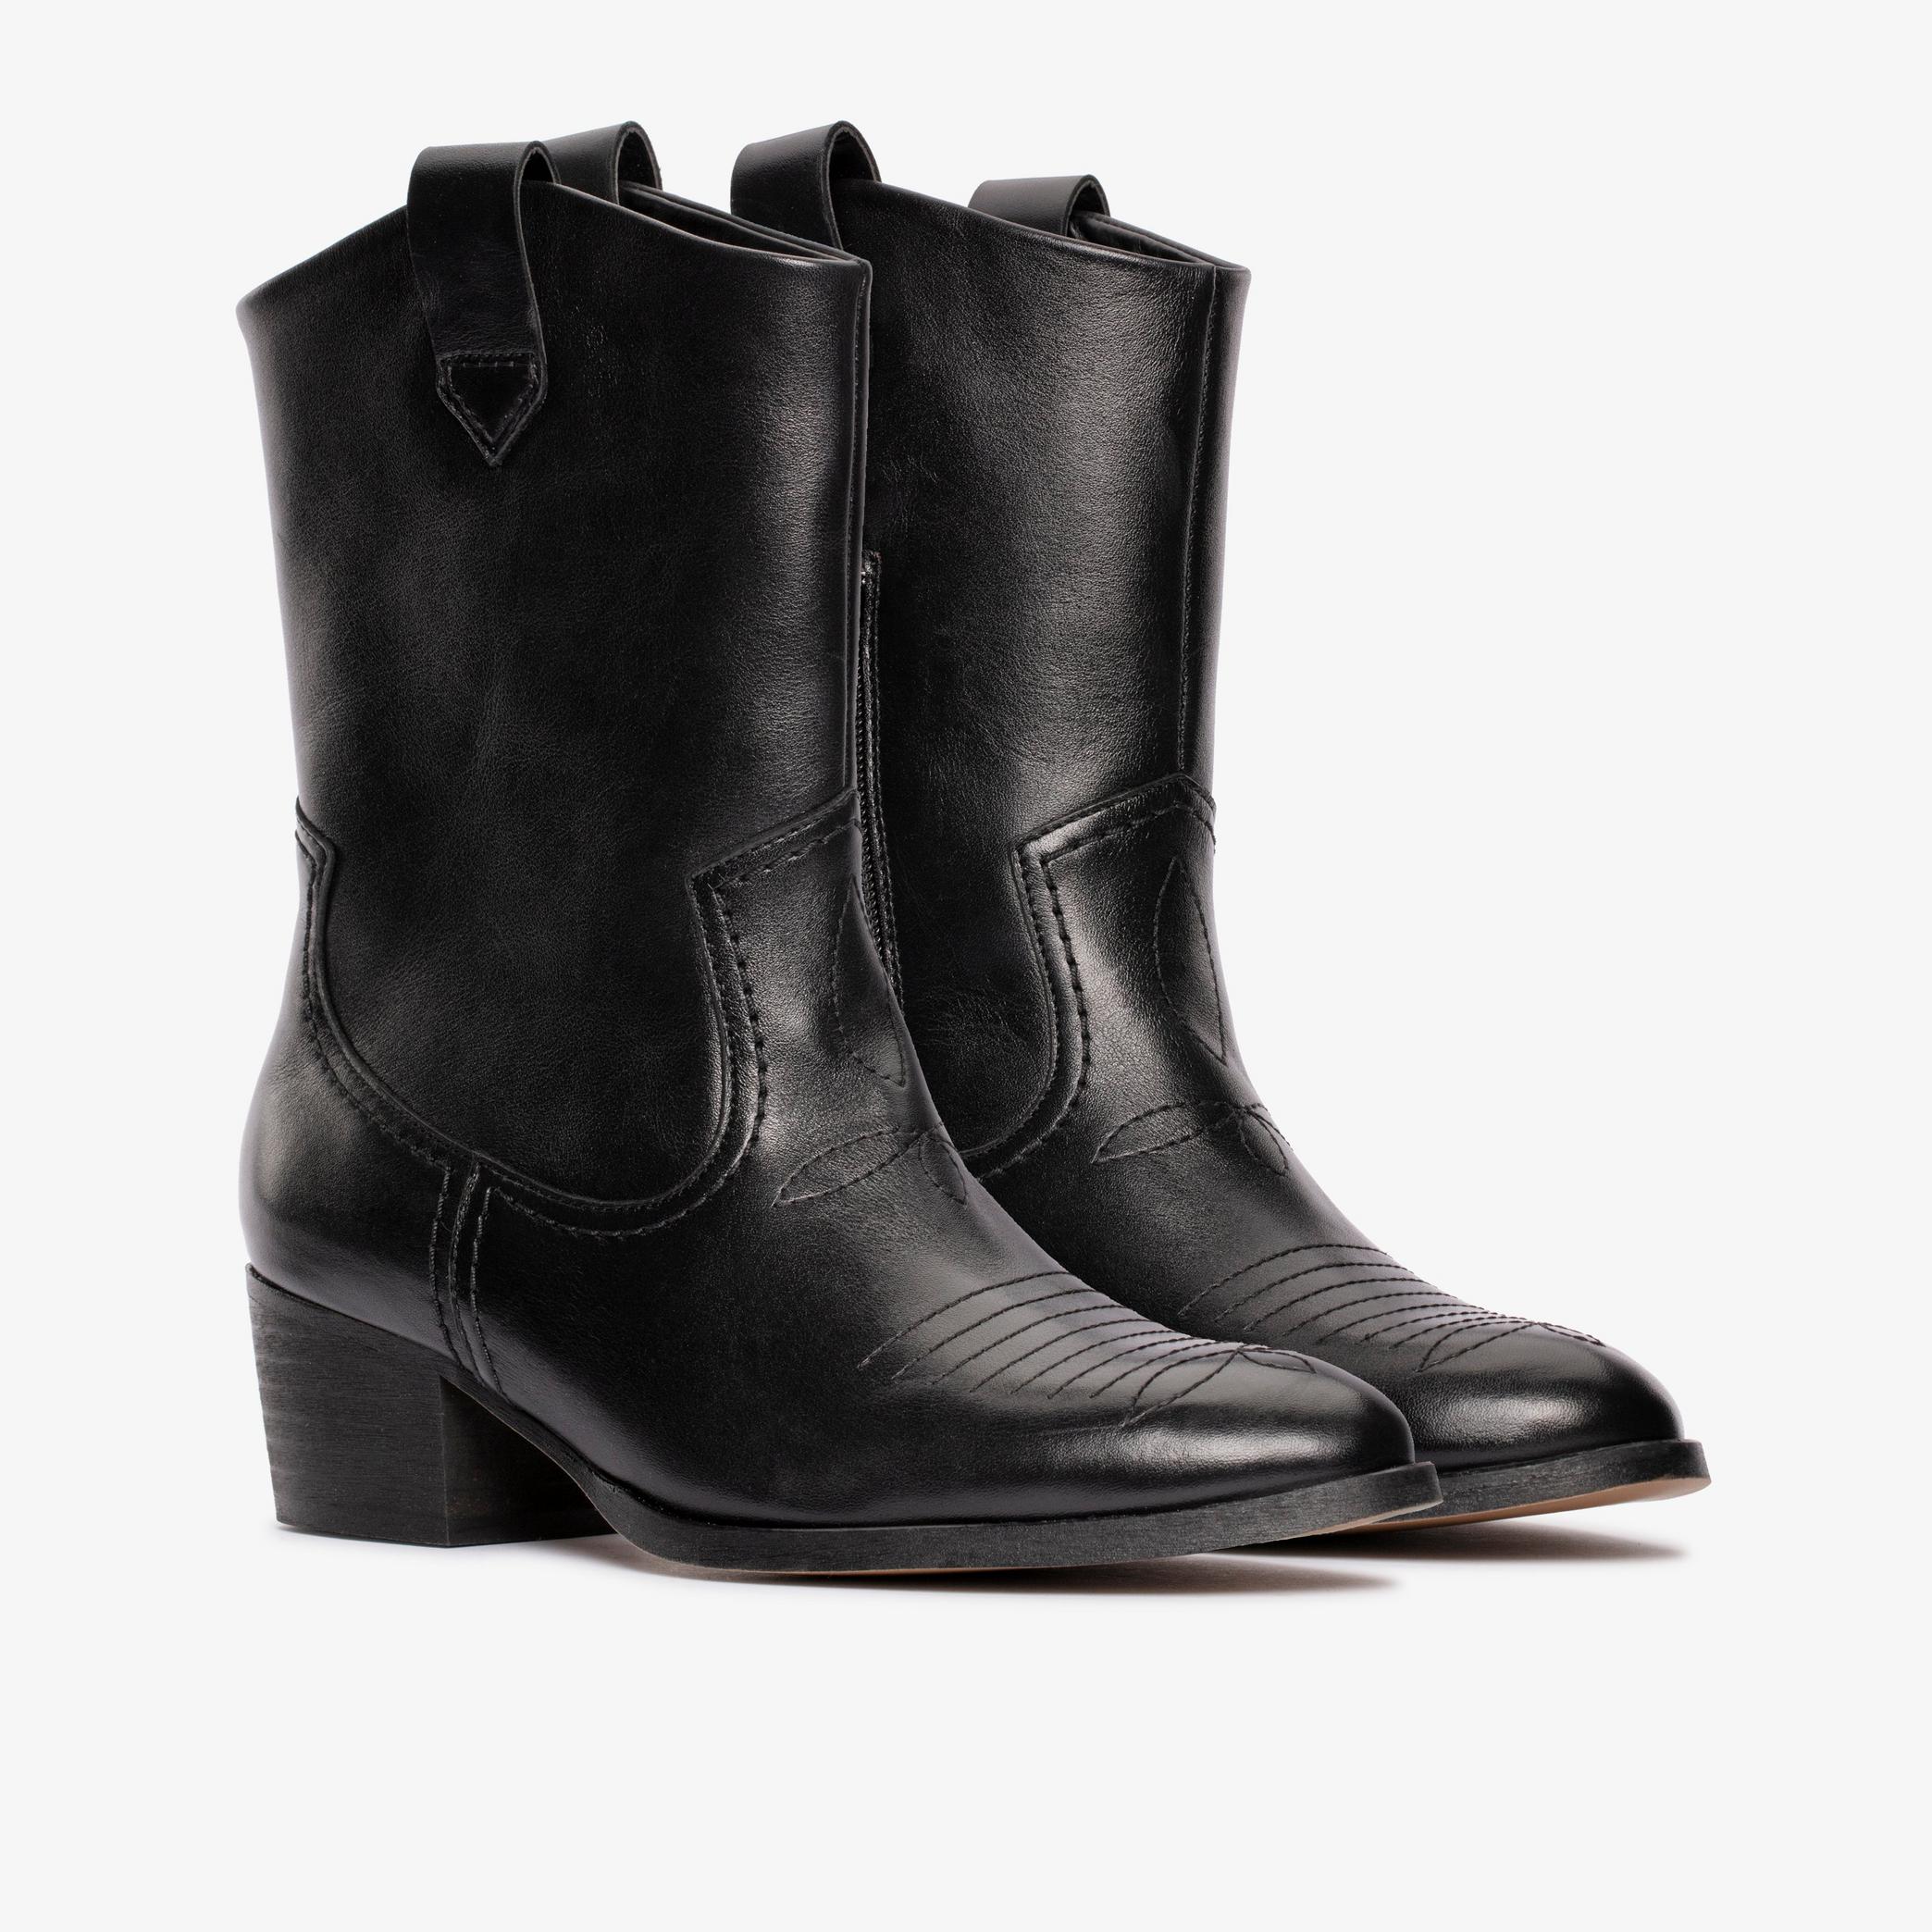 Octavia Up Black Leather Mid Calf Boots, view 4 of 6